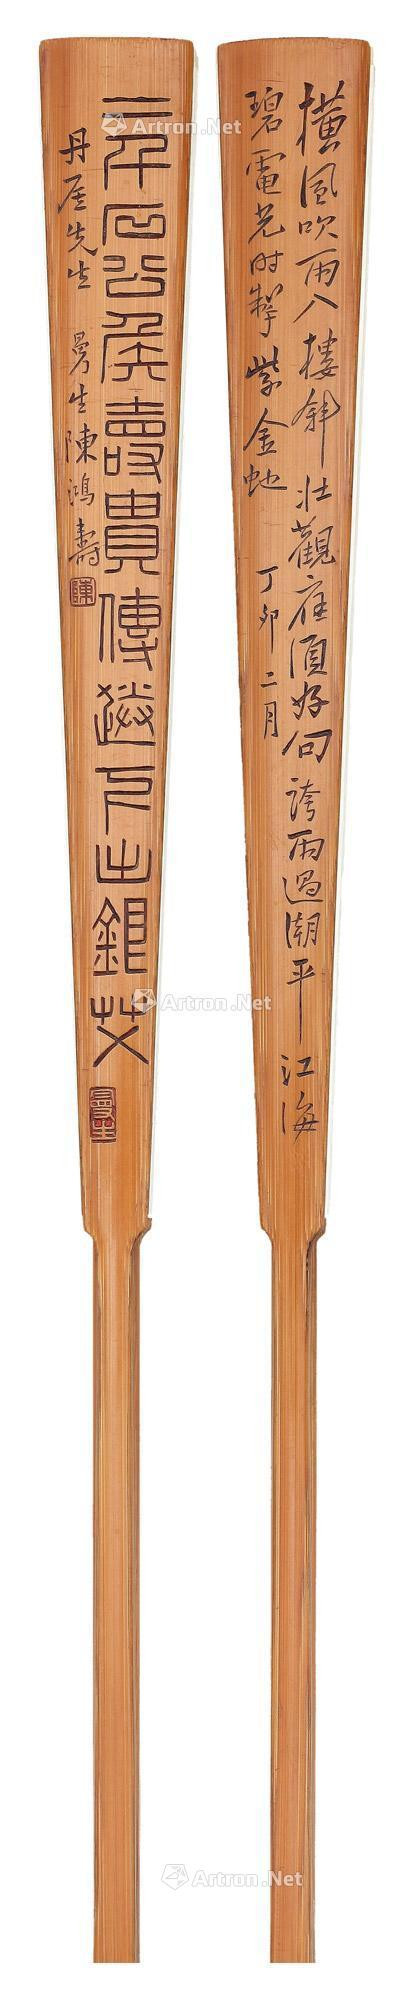 A BAMBOO CARVED ‘CALLIGRAPHY IN OFFICIAL AND RUNNING SCRIPT’ BY CHEN HONGSHOU